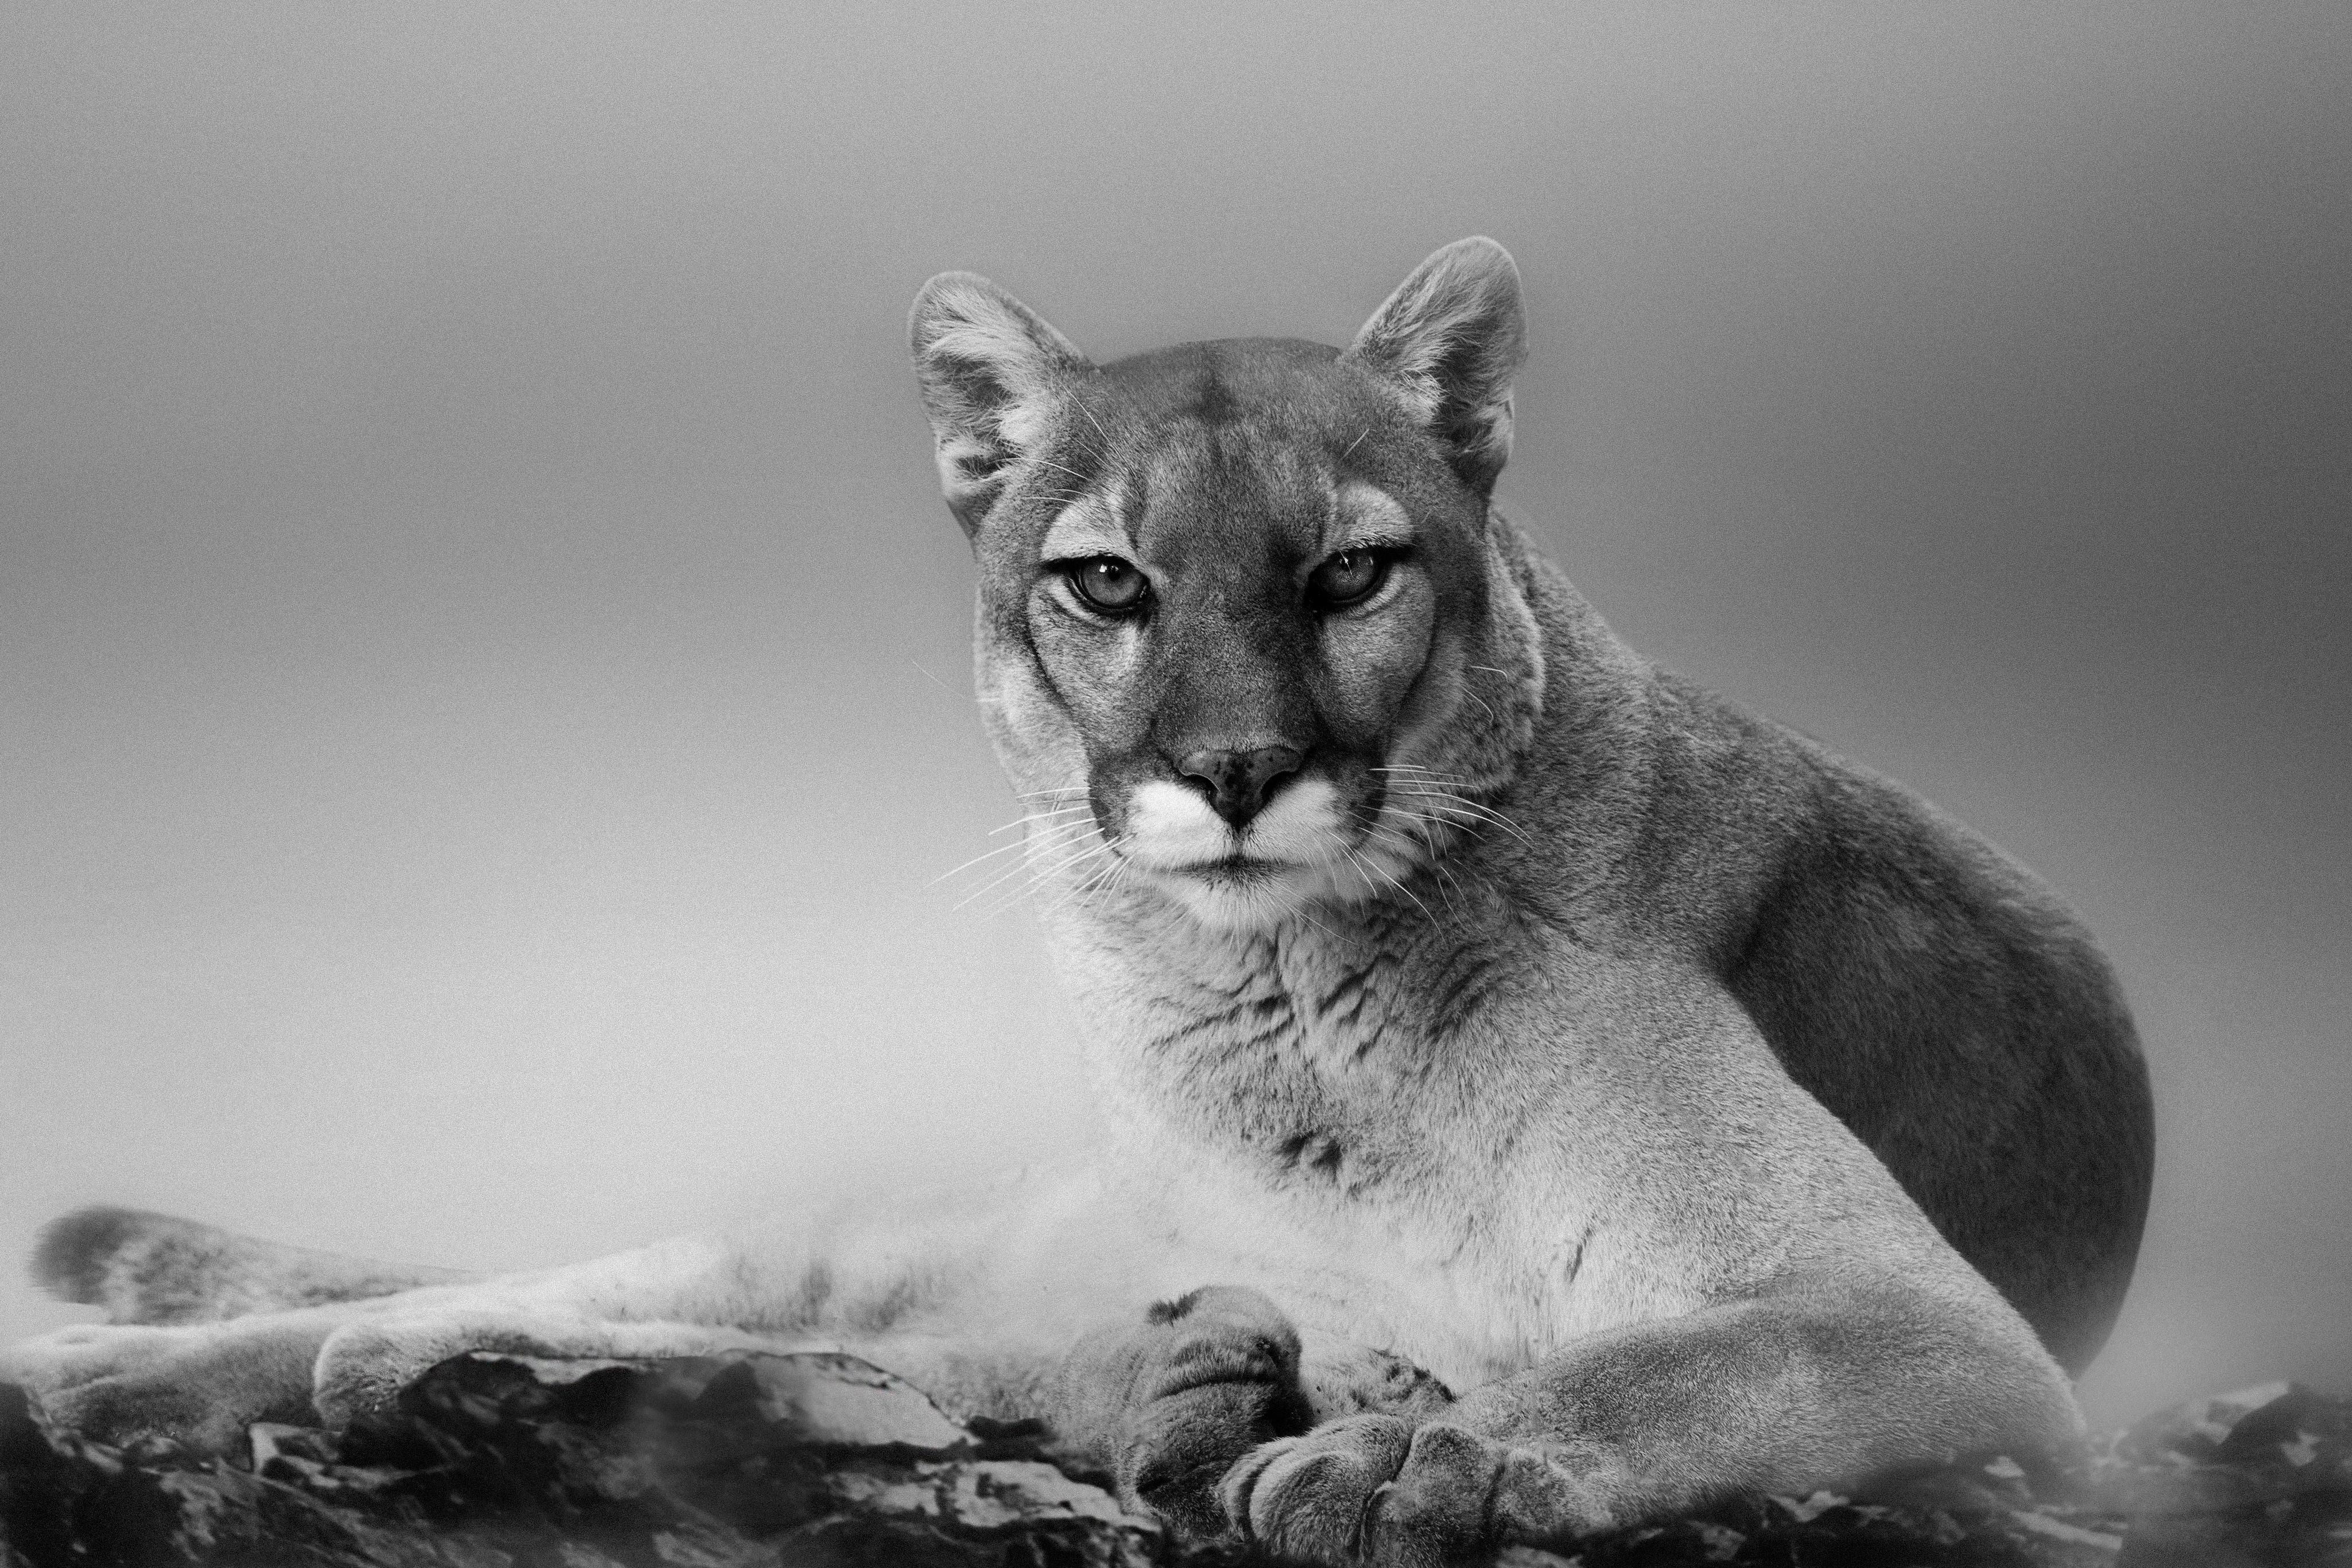 Shane Russeck Animal Print - Cougar Print 36x48 - Fine Art Photography of Mountain Lion Black and White Art 